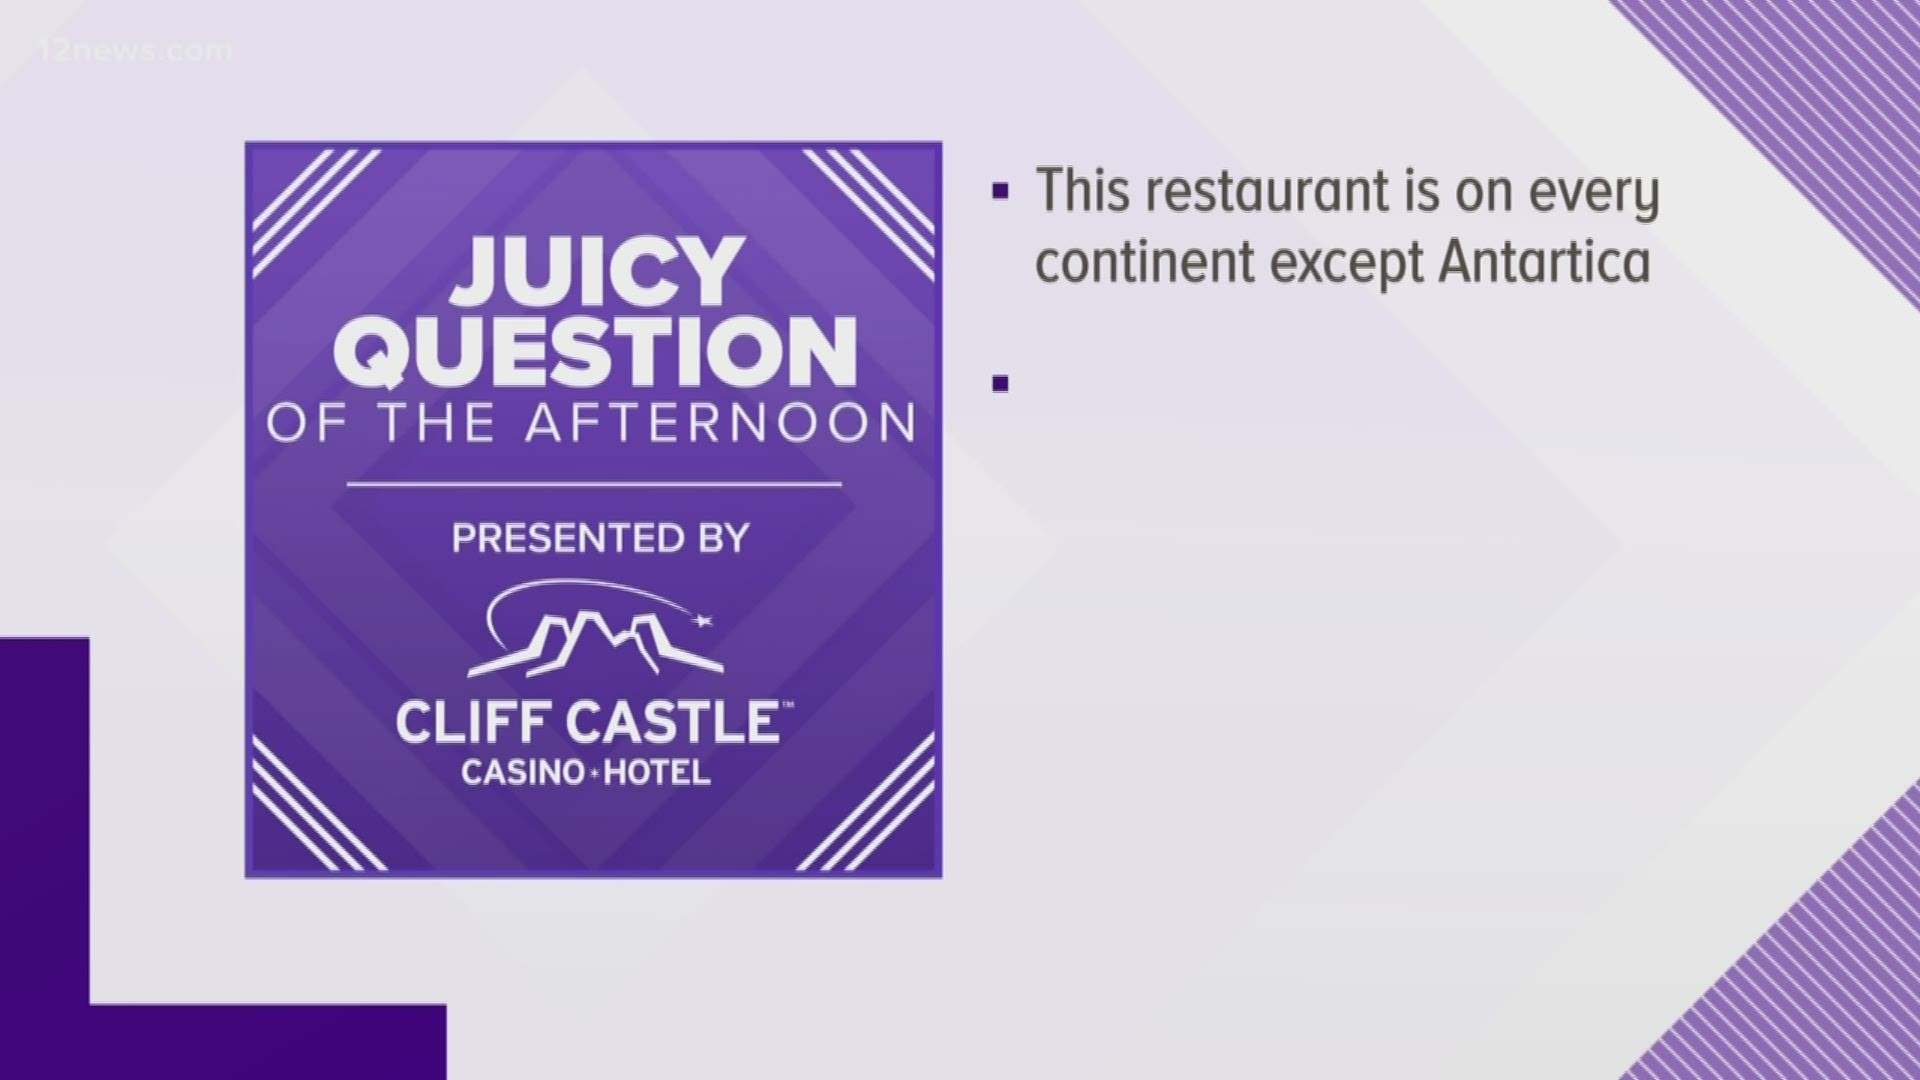 THIS restaurant in on every continent except Antarctica. What is the restaurant?